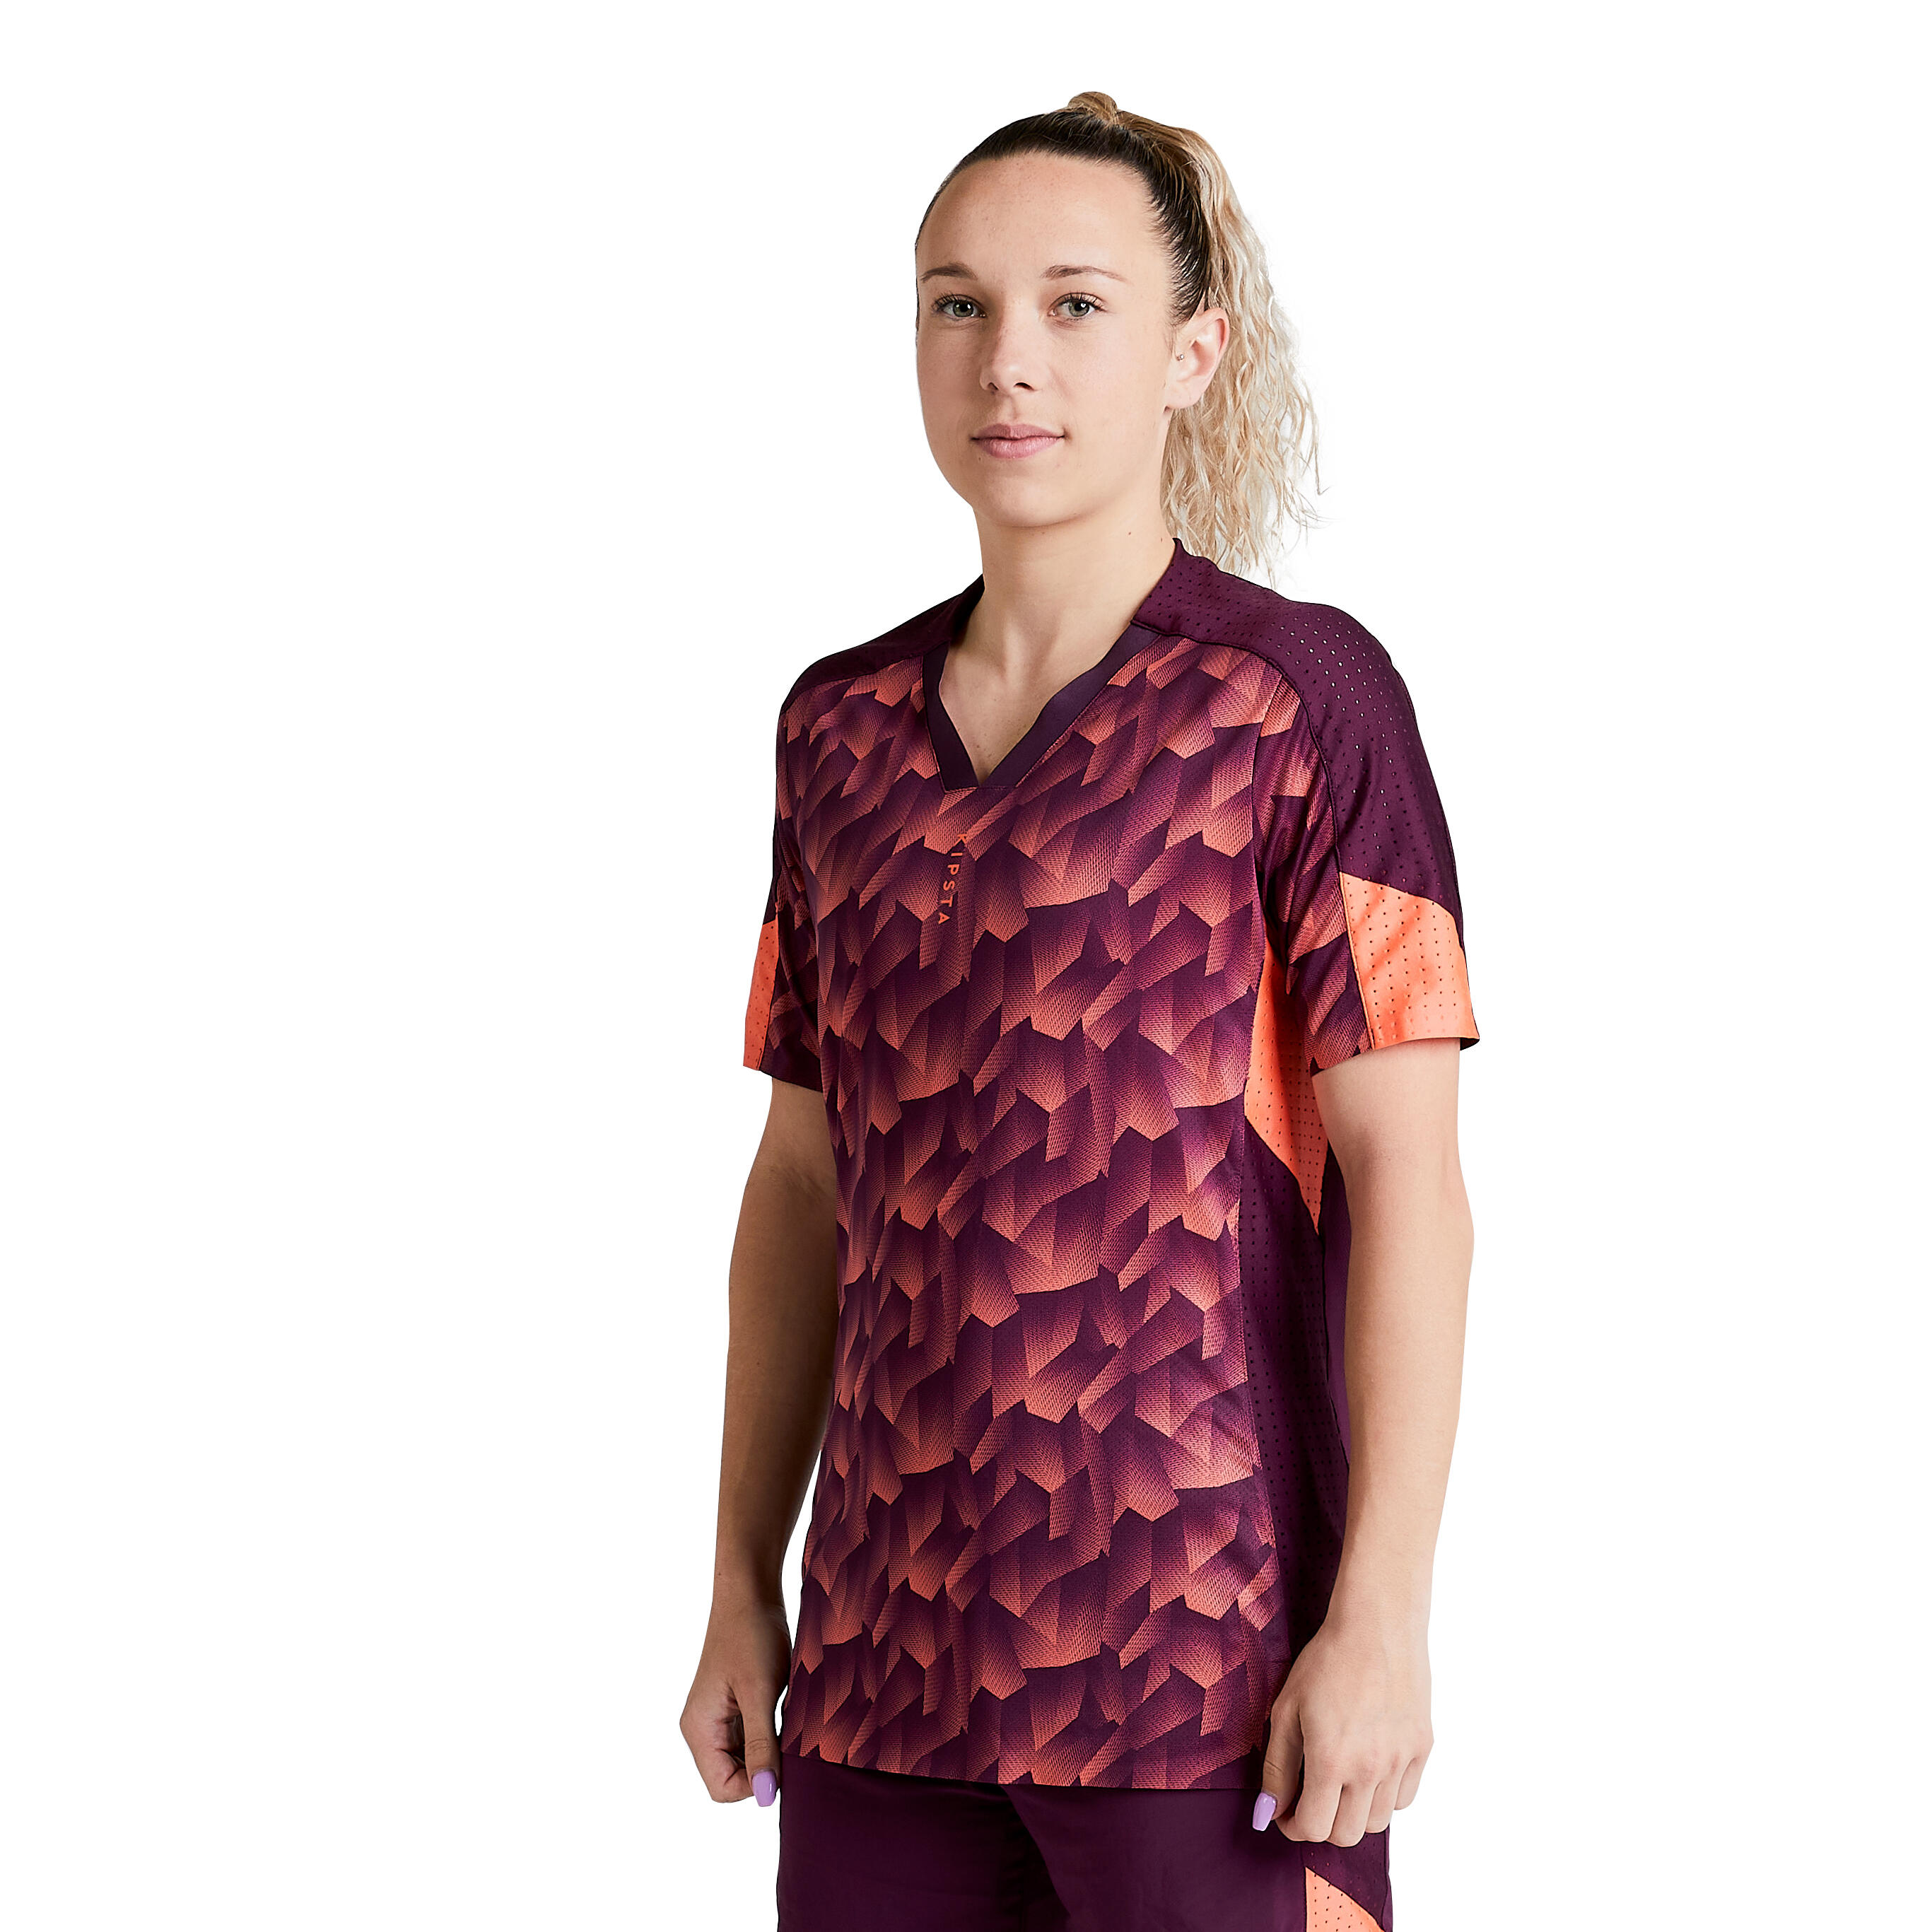 Women's Football Jersey F900 - Coral 2/31